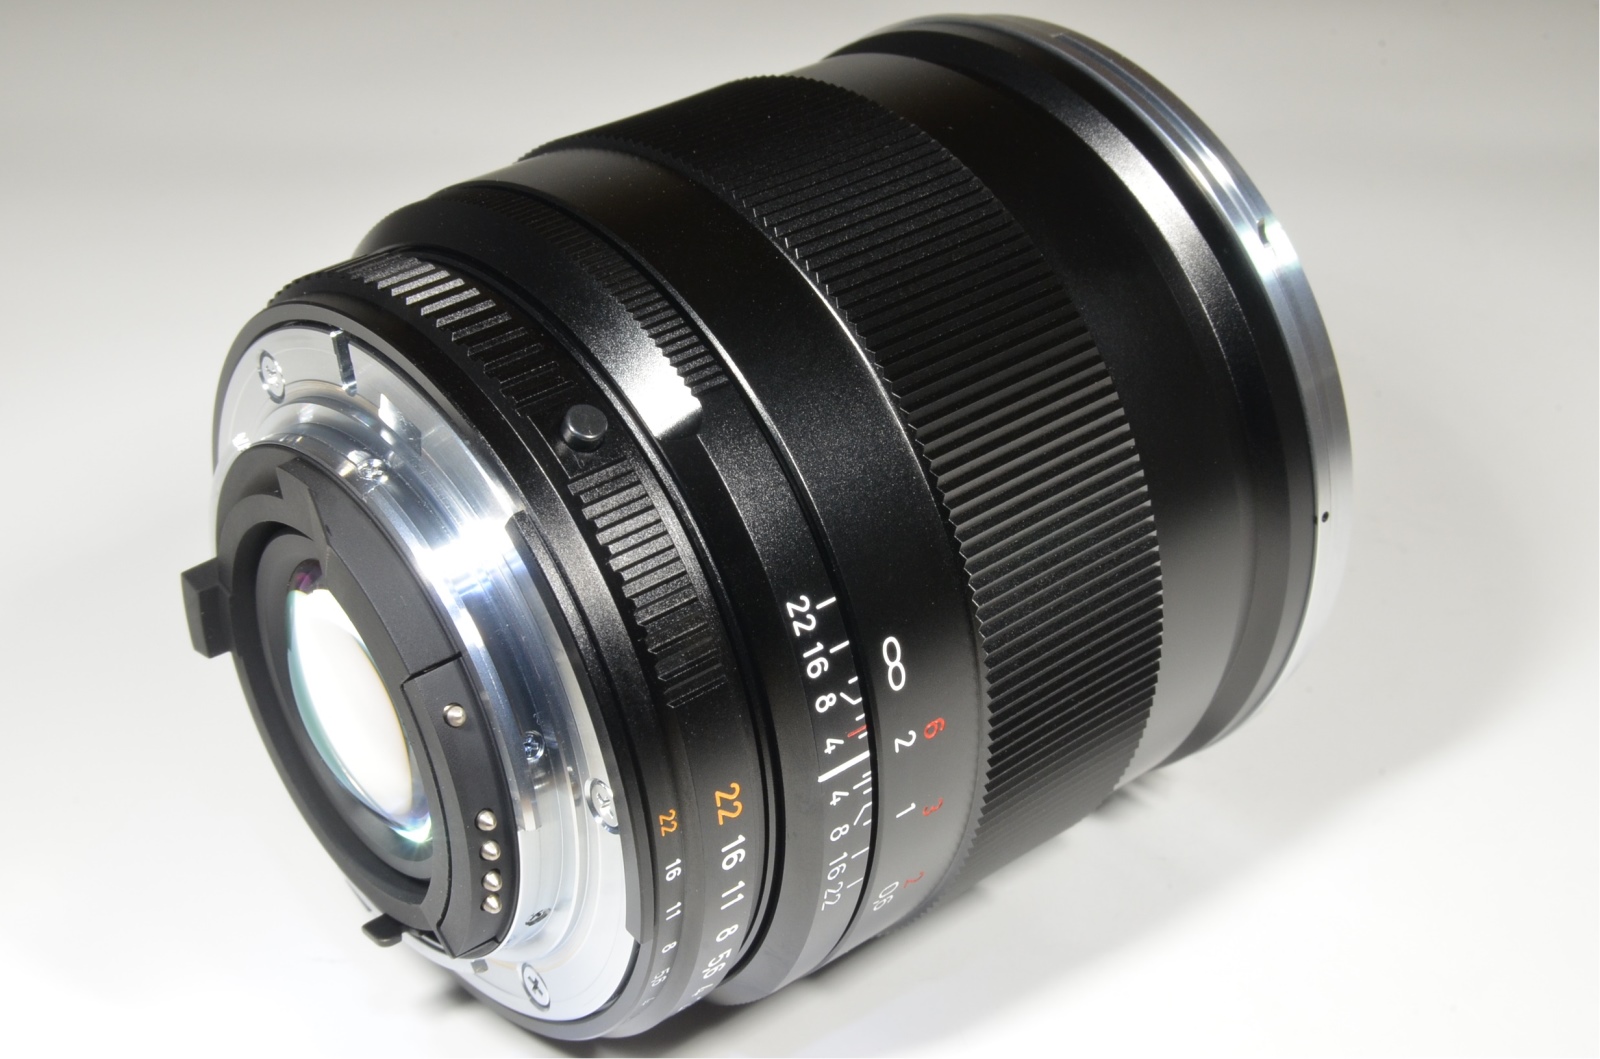 carl zeiss distagon t* 25mm f2 zf.2 for nikon